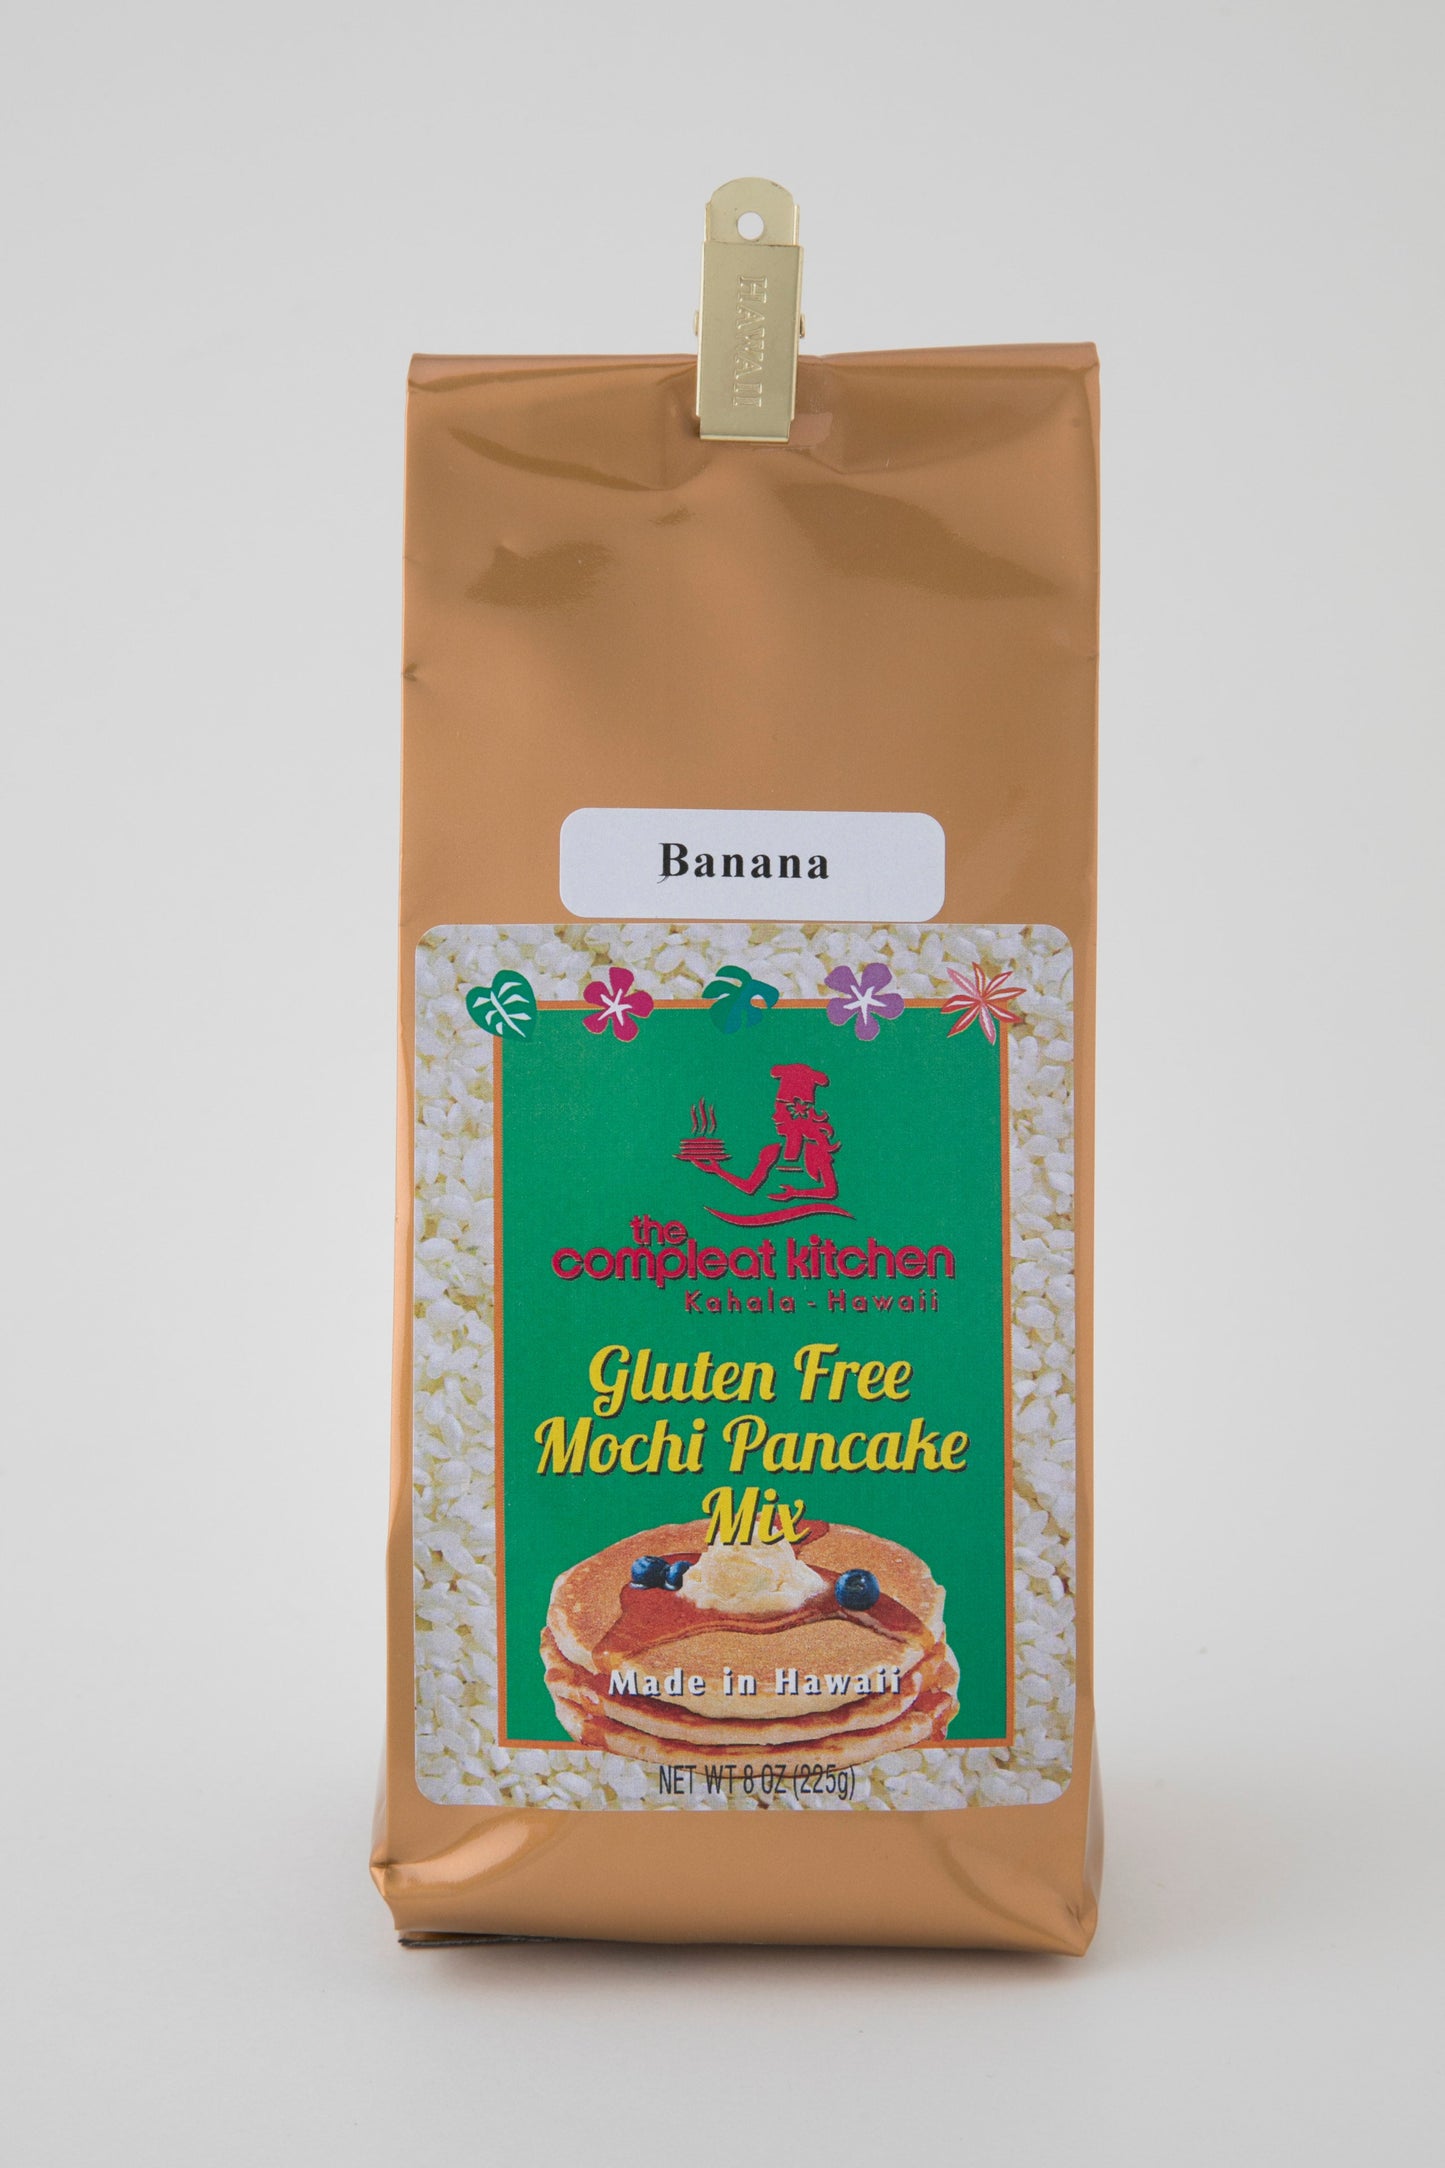 The Compleat Kitchen Original Gluten-Free Mochi Pancakes - 8 oz. (6 flavors) - Made in Hawai'i